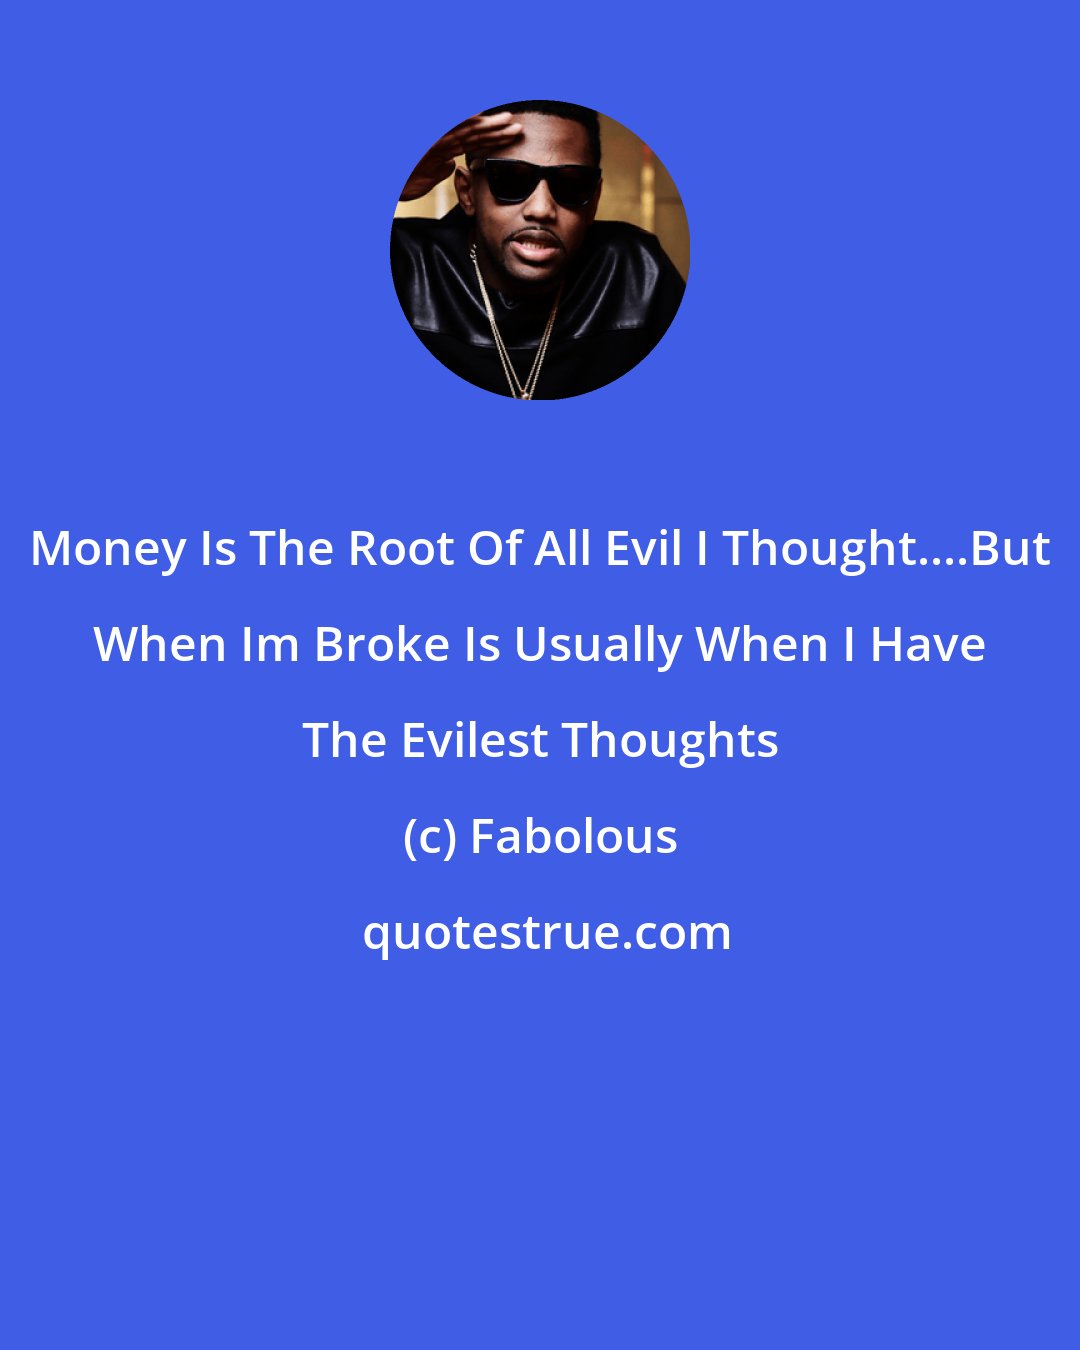 Fabolous: Money Is The Root Of All Evil I Thought....But When Im Broke Is Usually When I Have The Evilest Thoughts